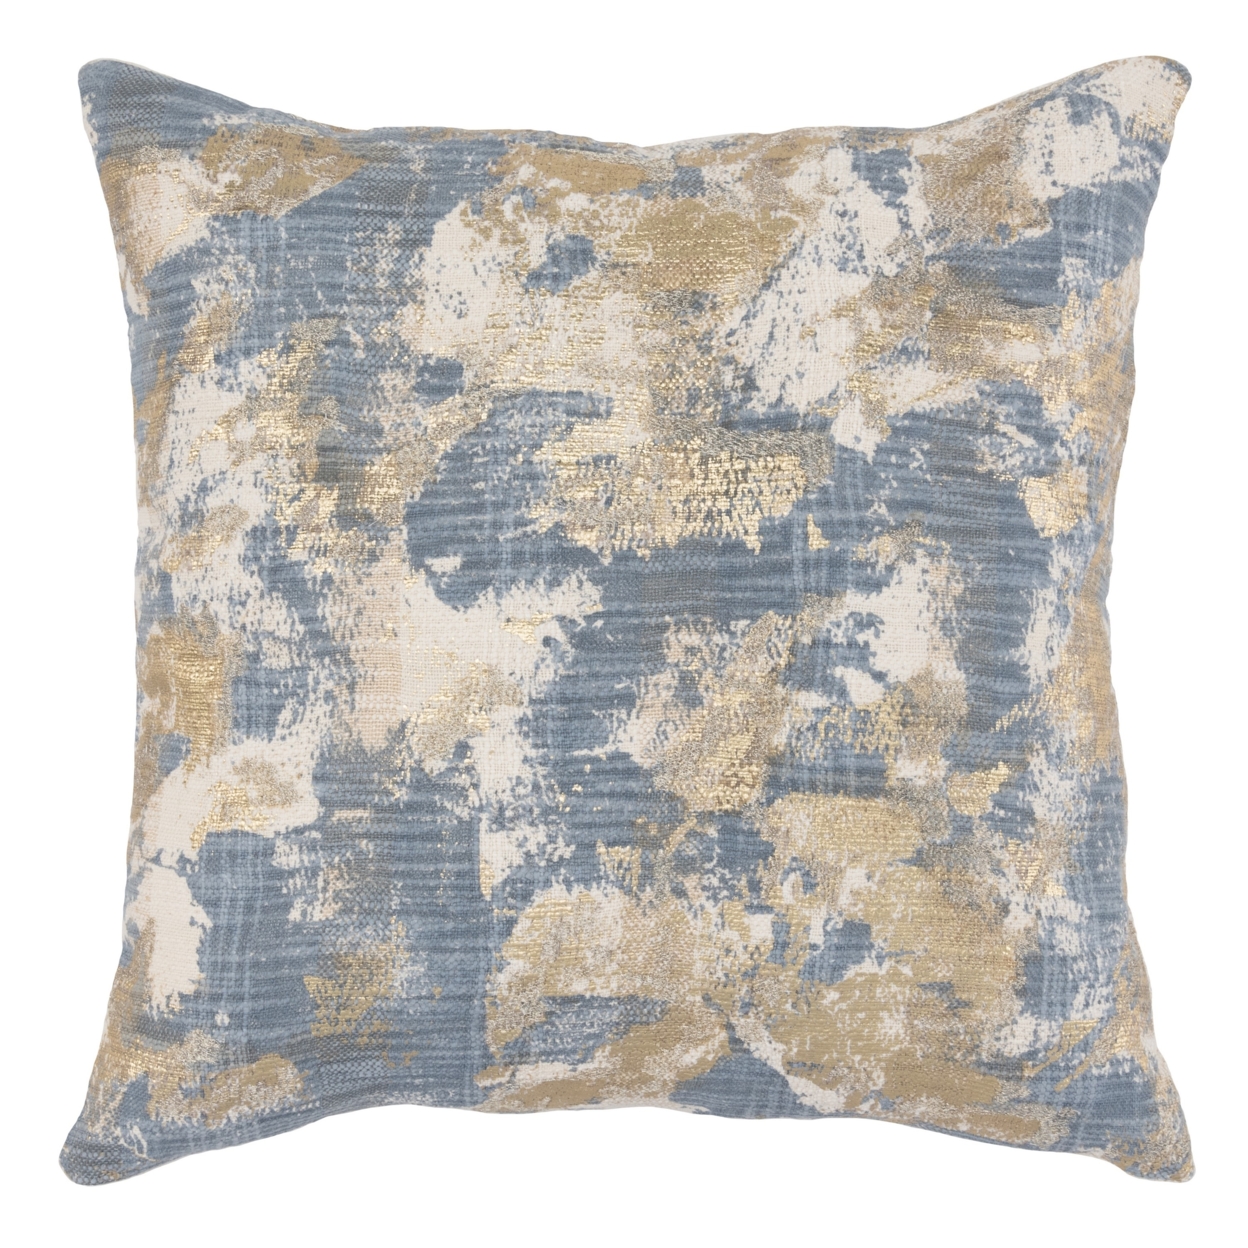 Fabric Throw Pillow With Hand Painted Design And Gold Foil Accents, Blue- Saltoro Sherpi